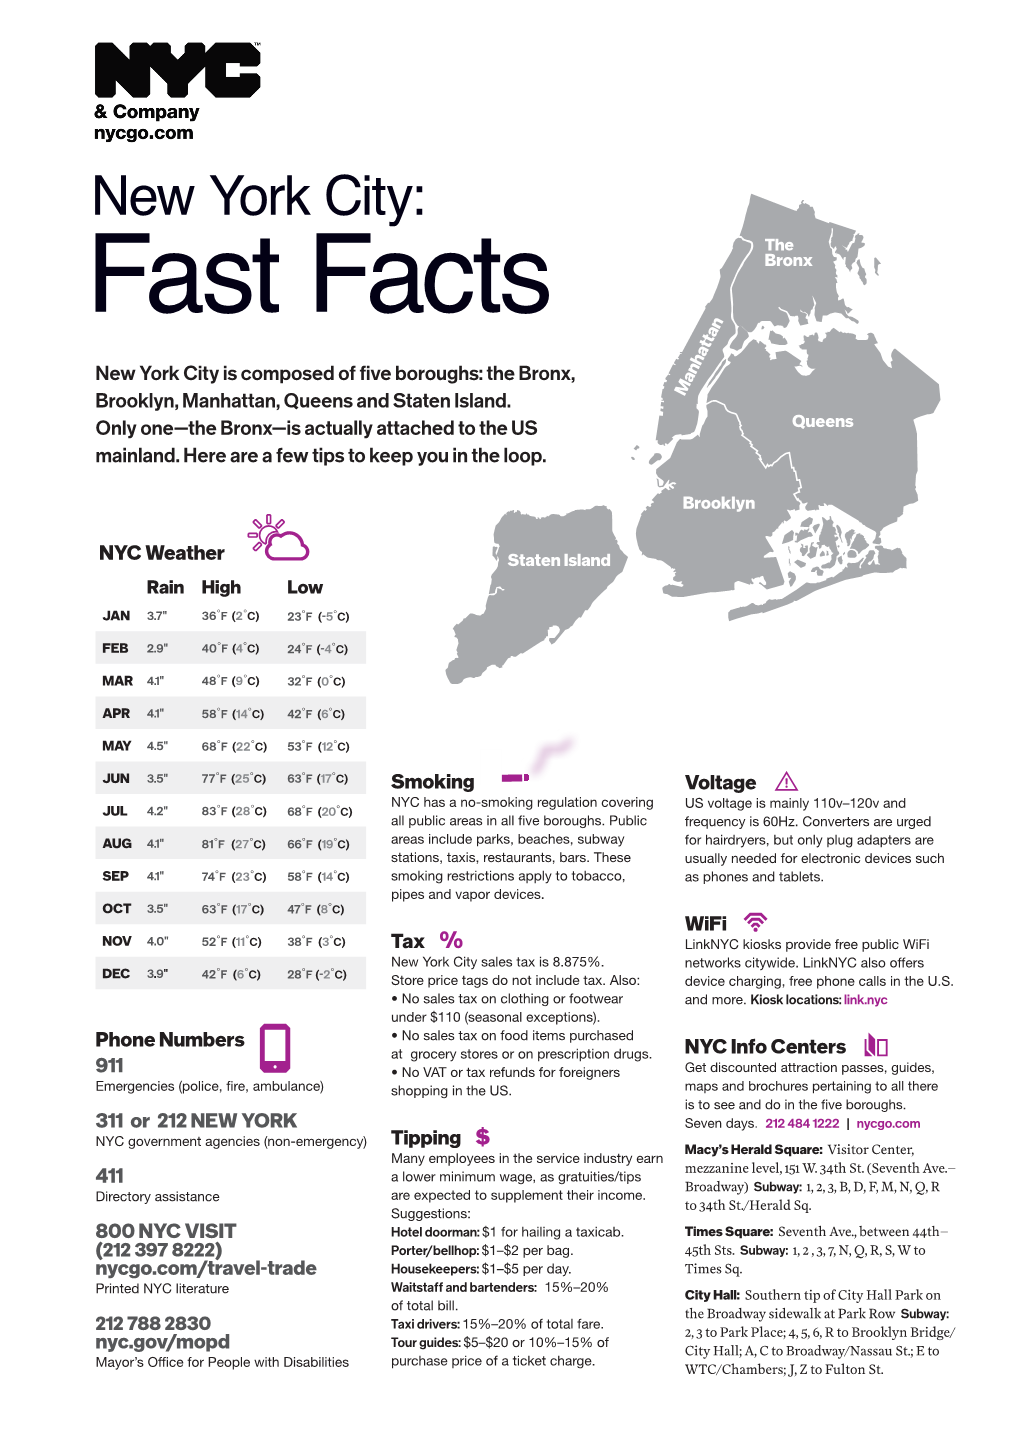 Fast Facts New York City Is Composed of Five Boroughs: the Bronx, Brooklyn, Manhattan, Queens and Staten Island